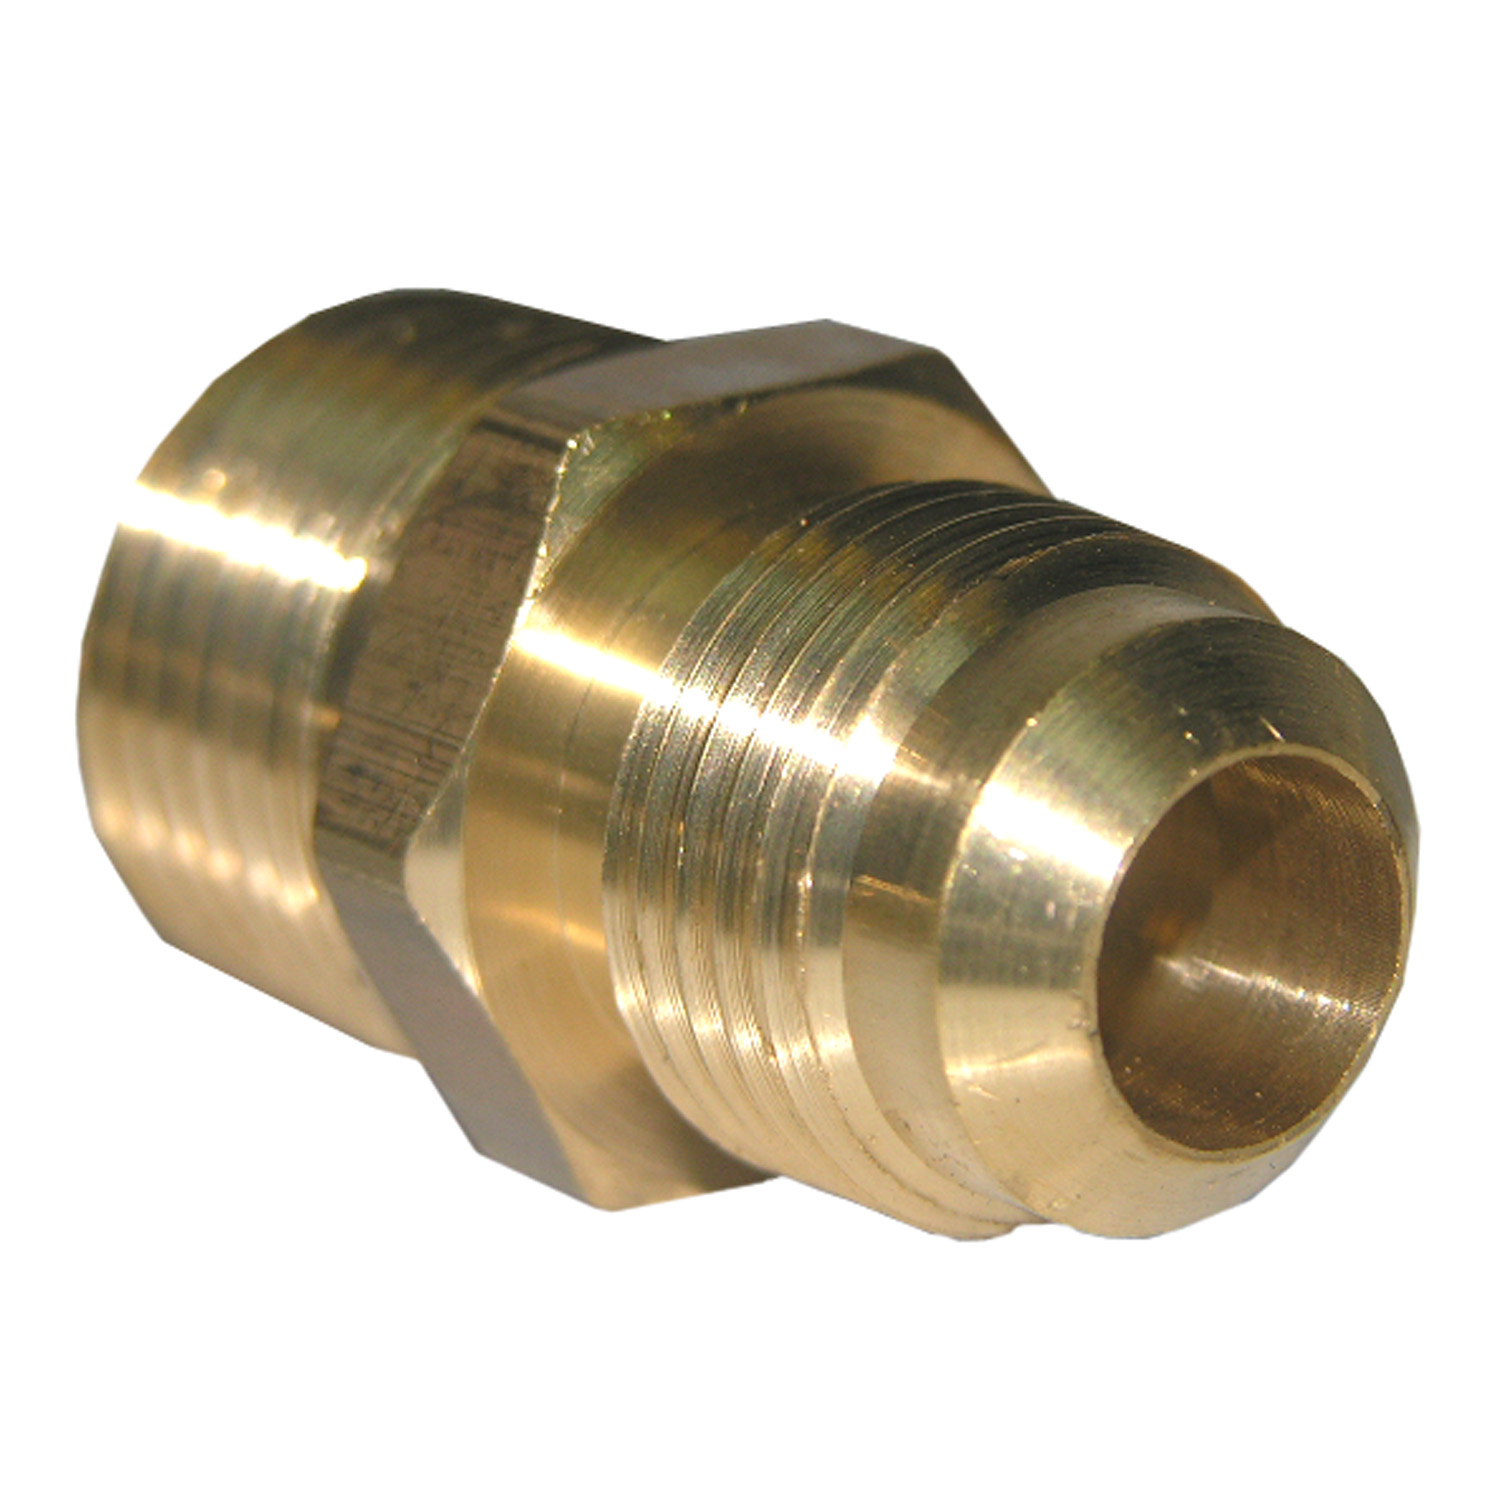 17-4849 Pipe Adapter, 1/2 in, Male Flare x MPT, Brass, 700 psi Pressure